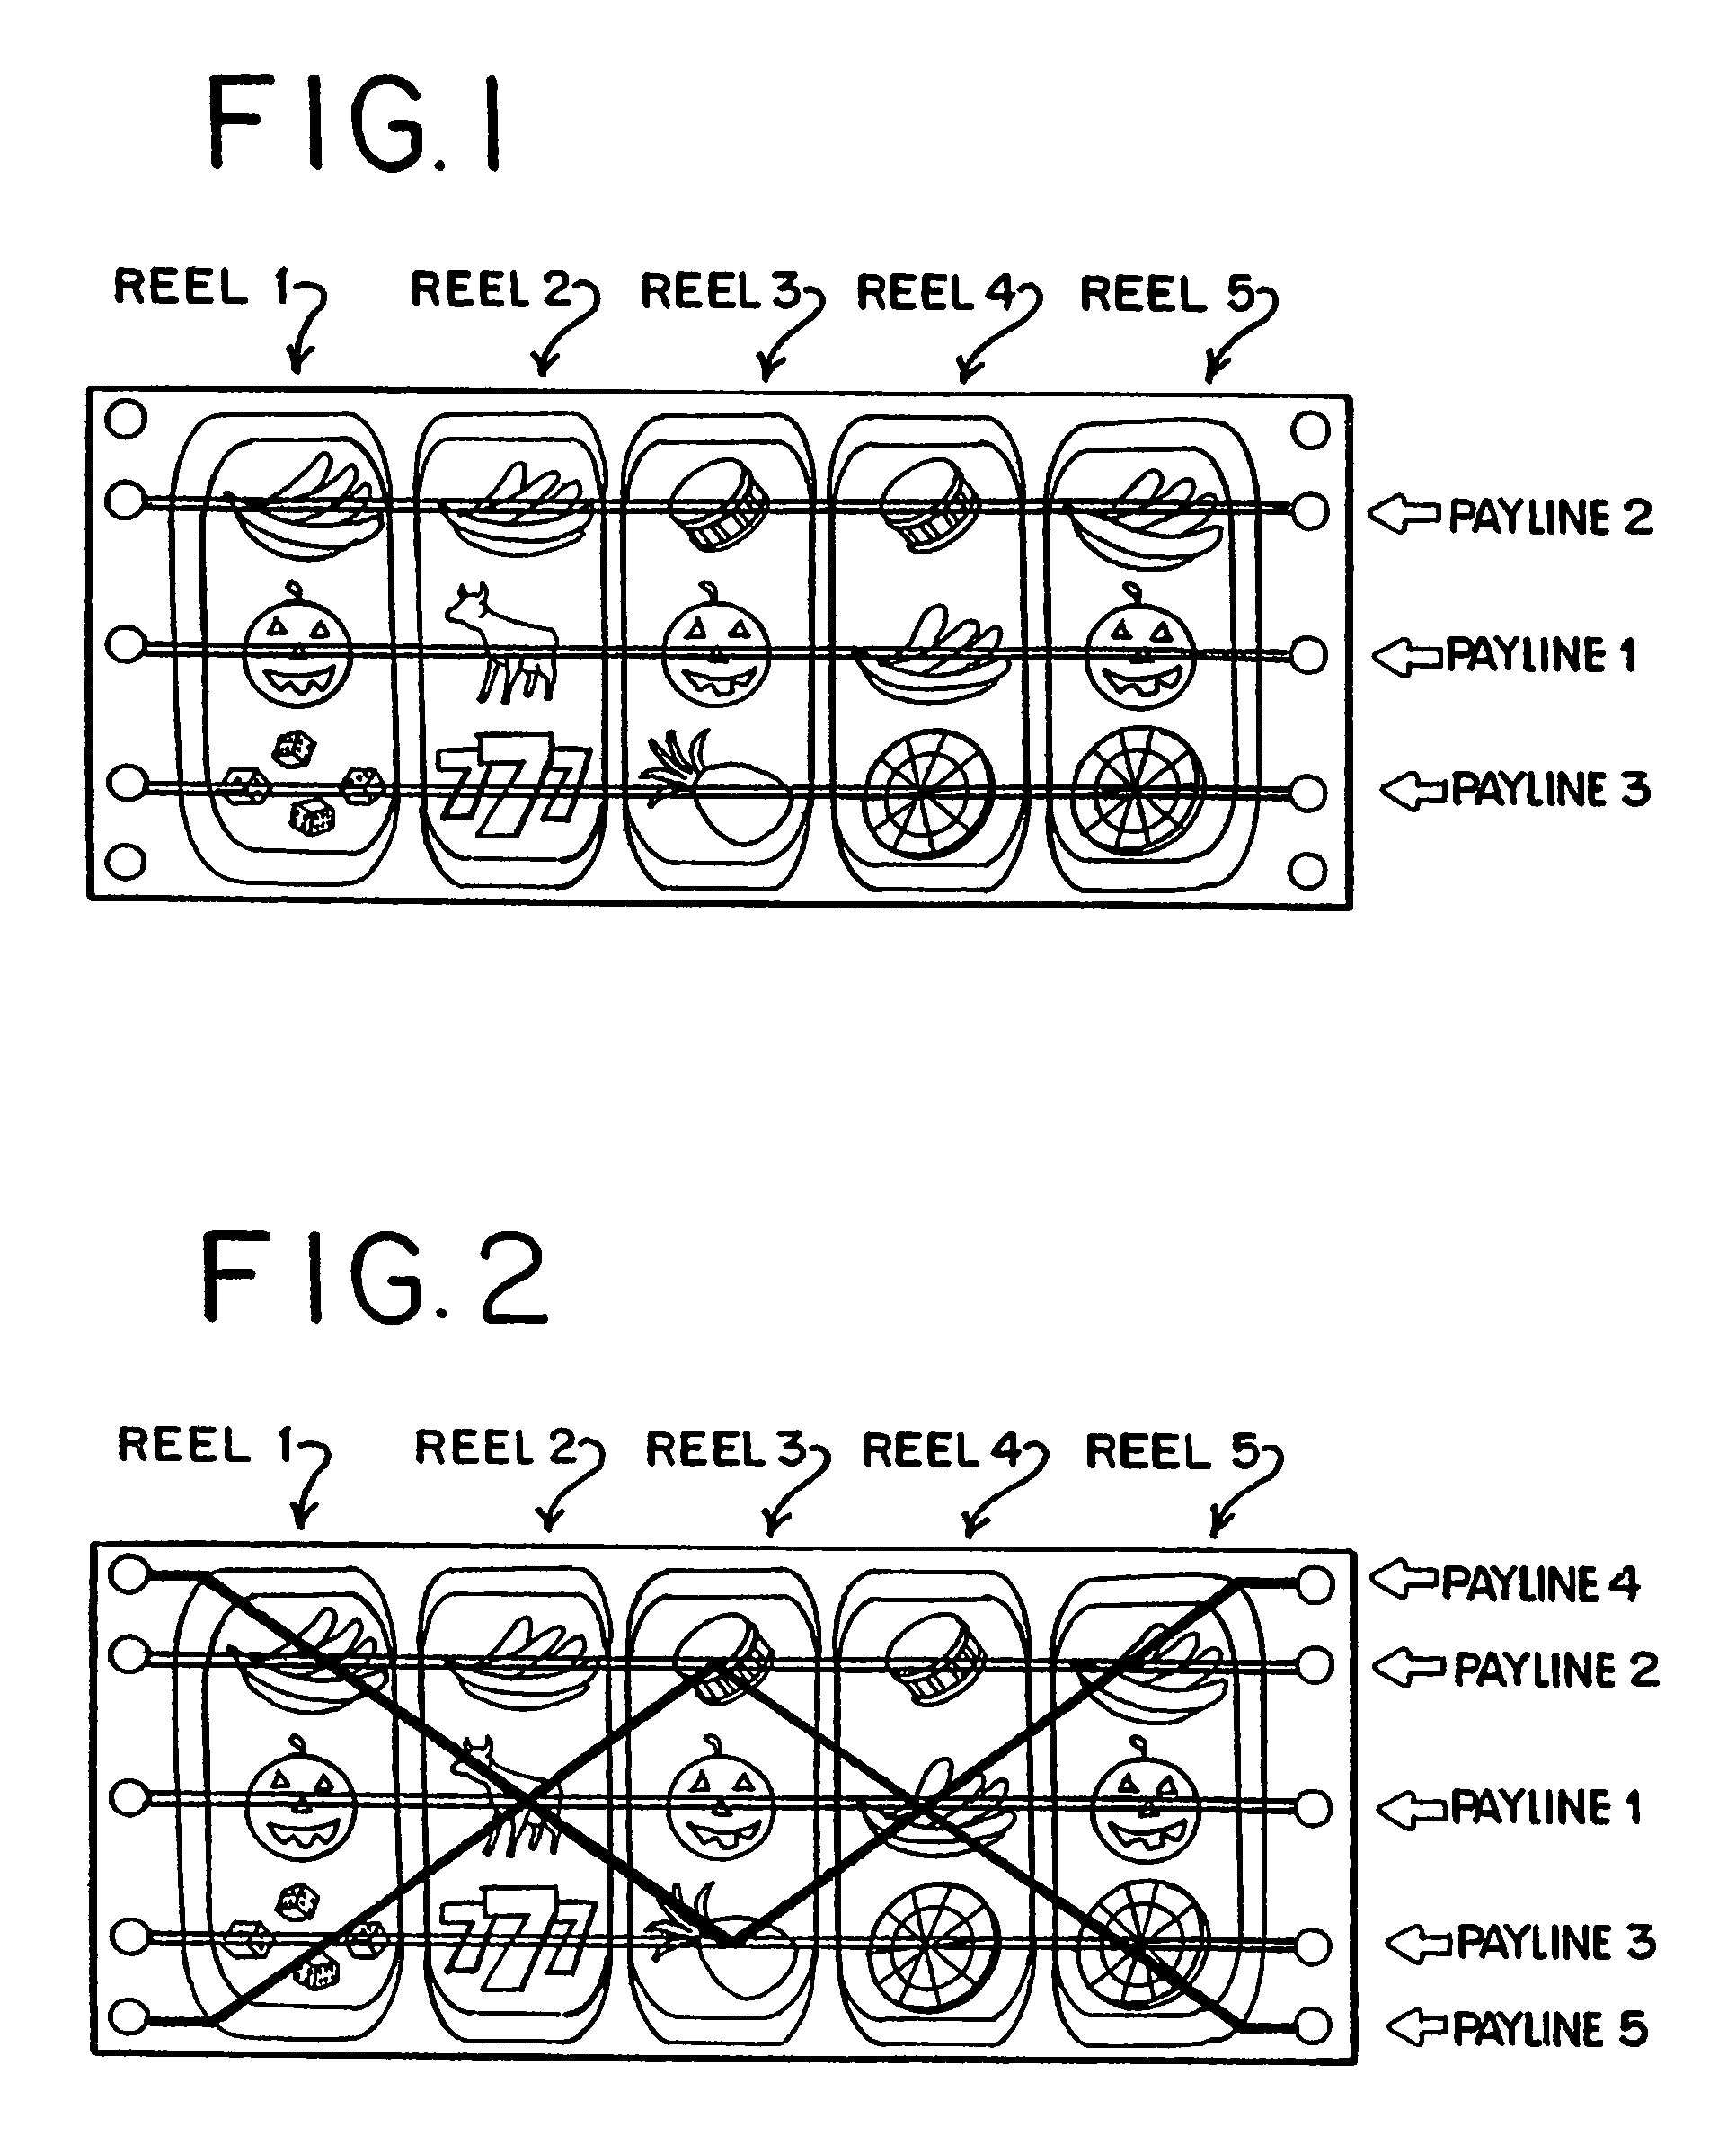 Multi-stage multi-bet dice game, gaming device, and method